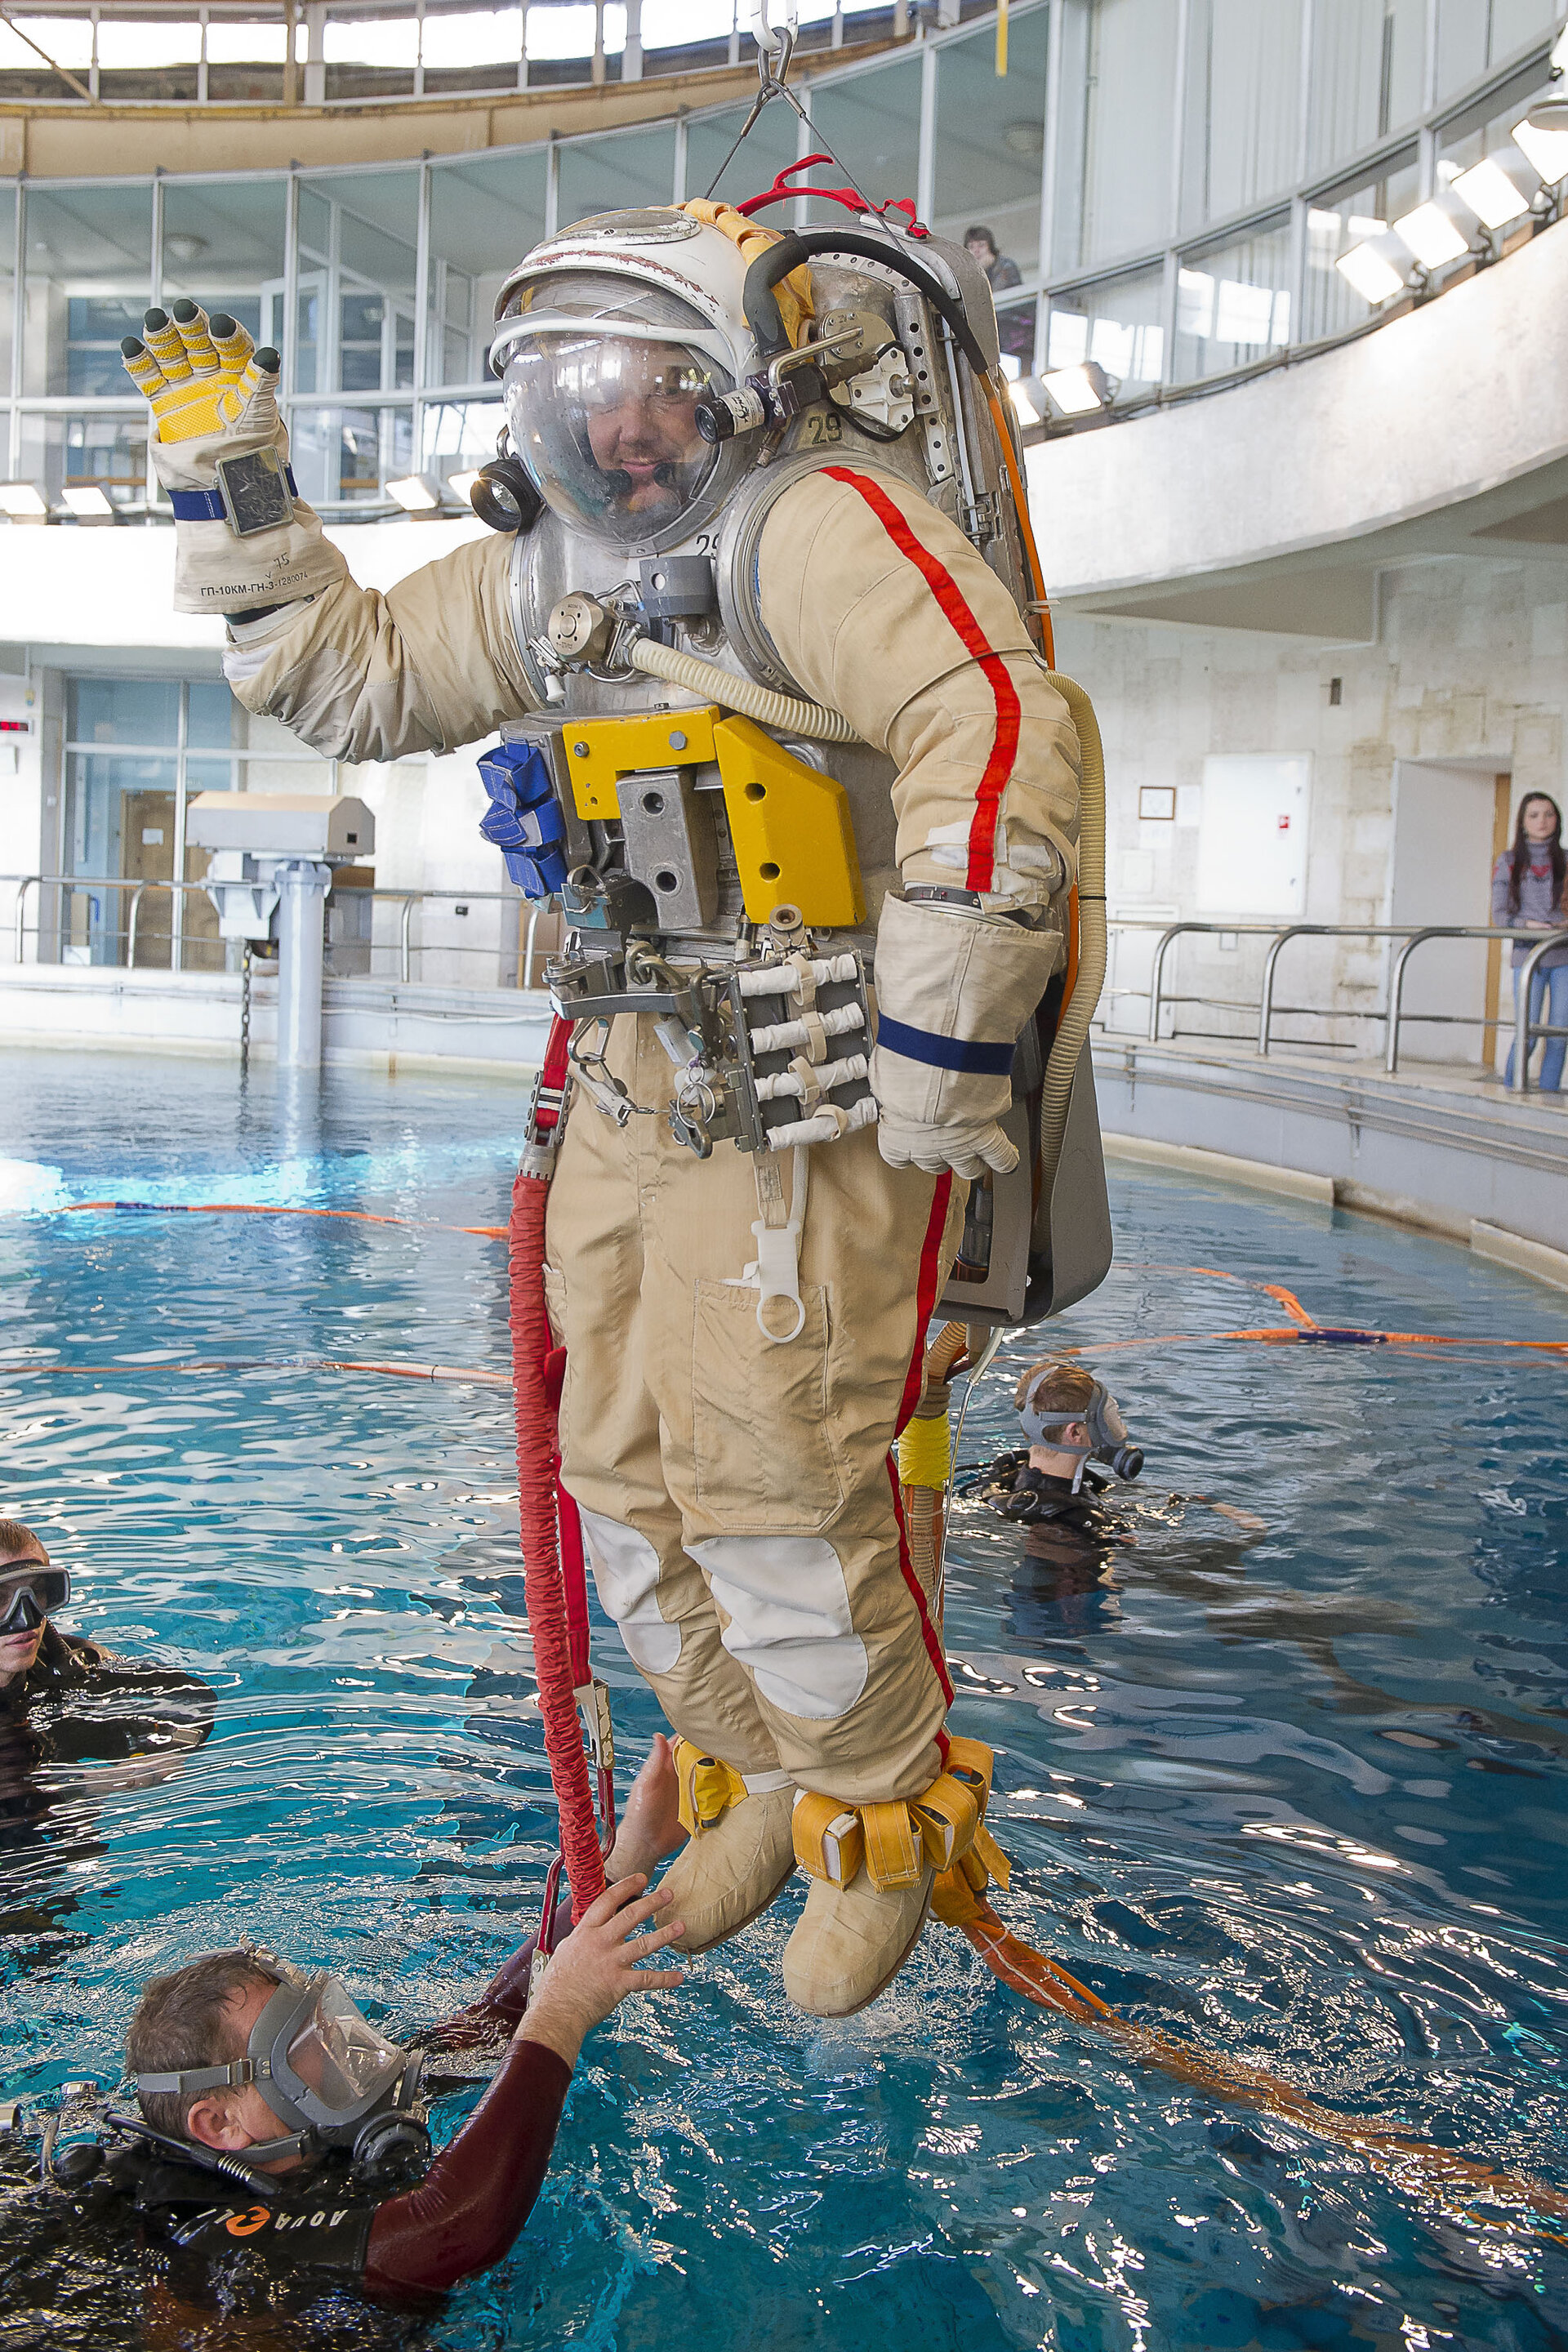 Alexander training with Orlan spacesuit